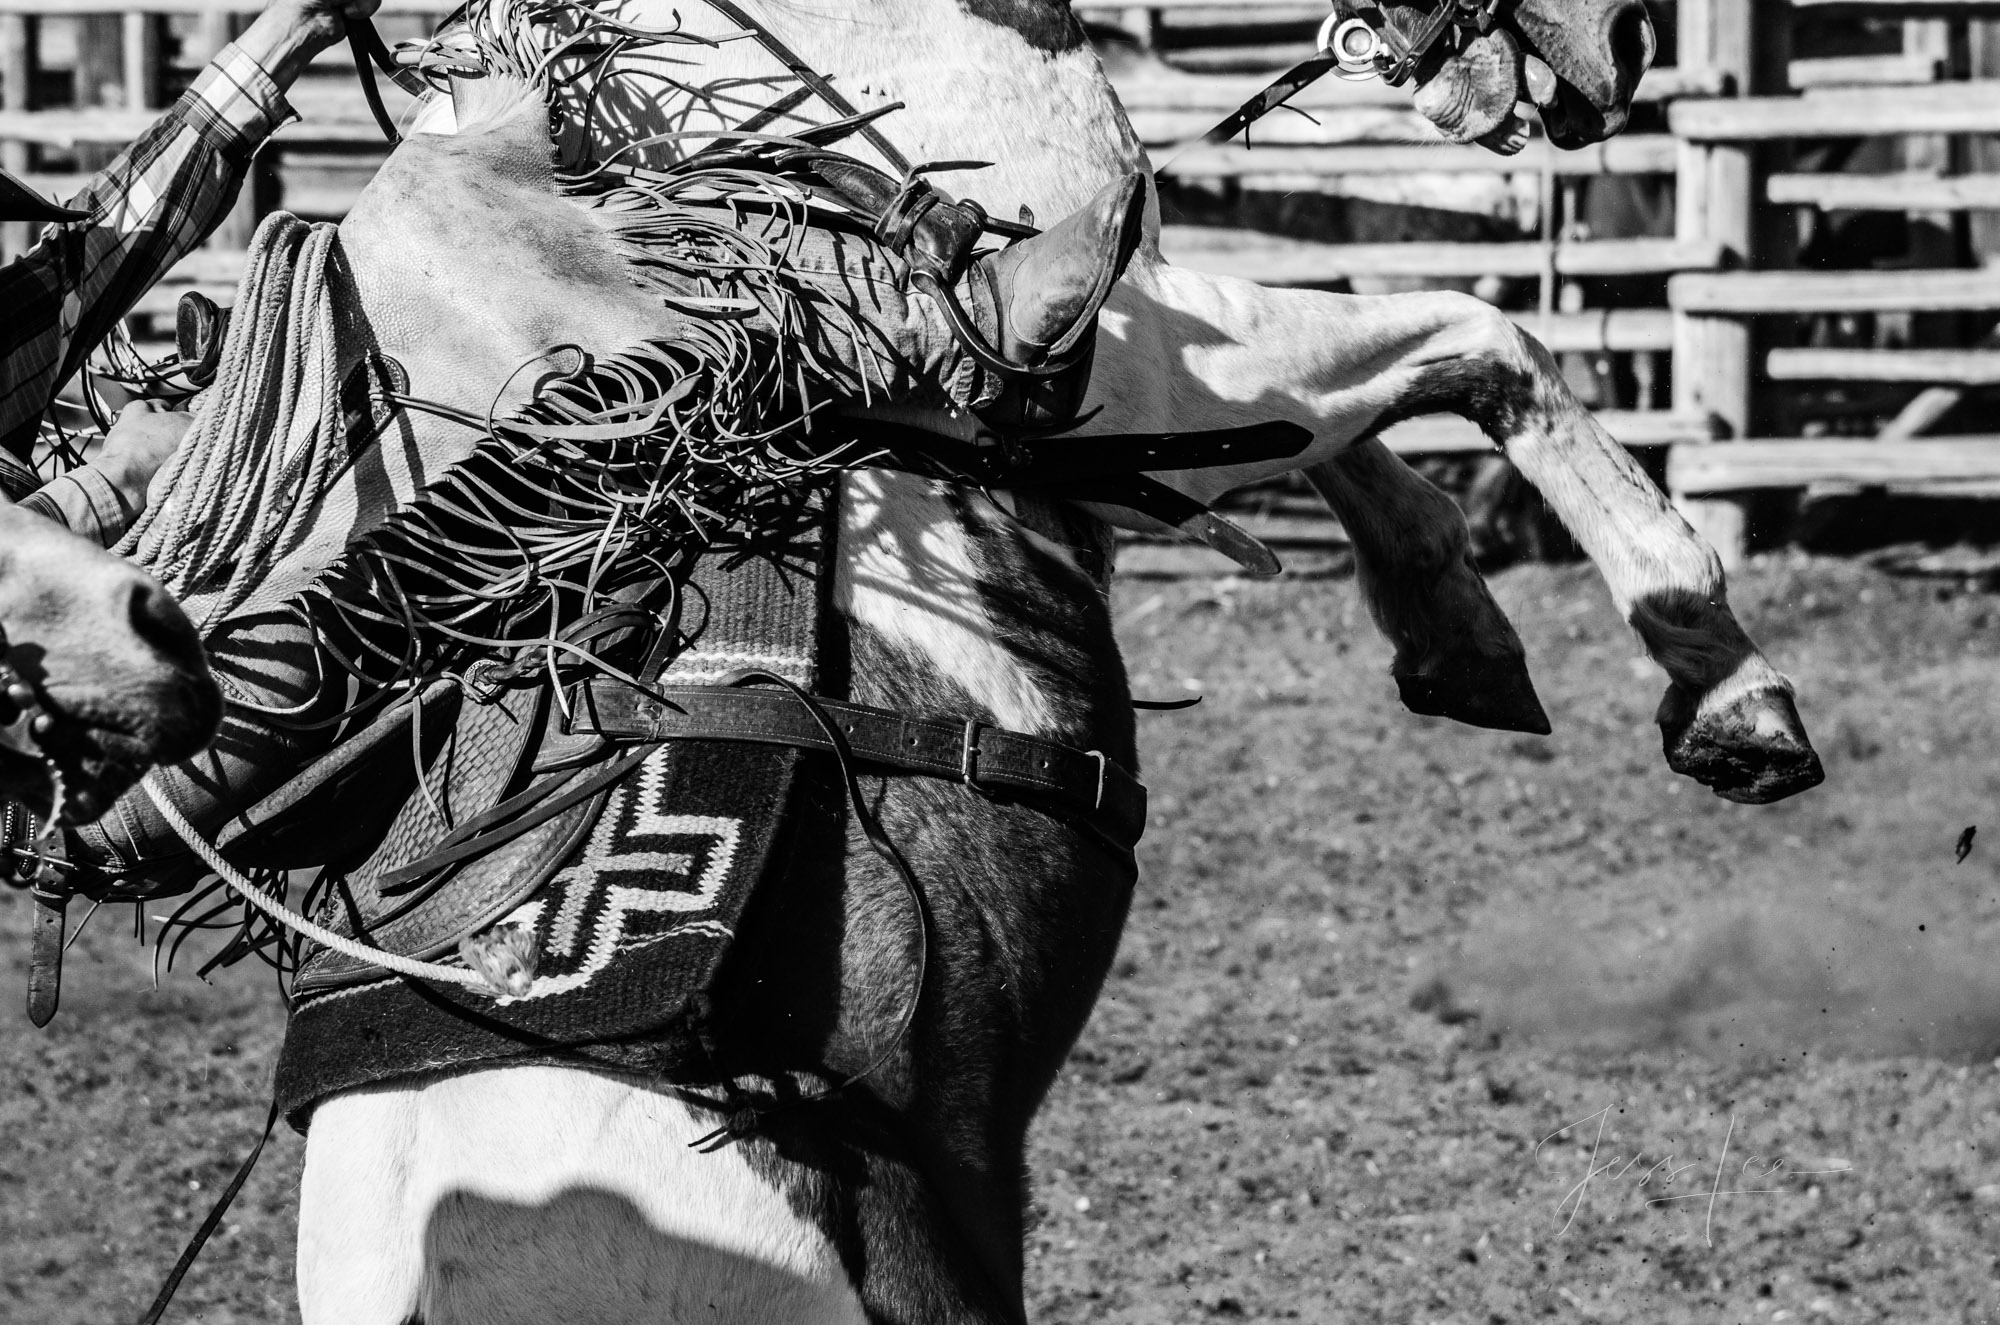 Fine Art Limited Edition Photo Prints of Cowboys, Horses, and life in the West. Good Times. A Cowboy picture in black and white...